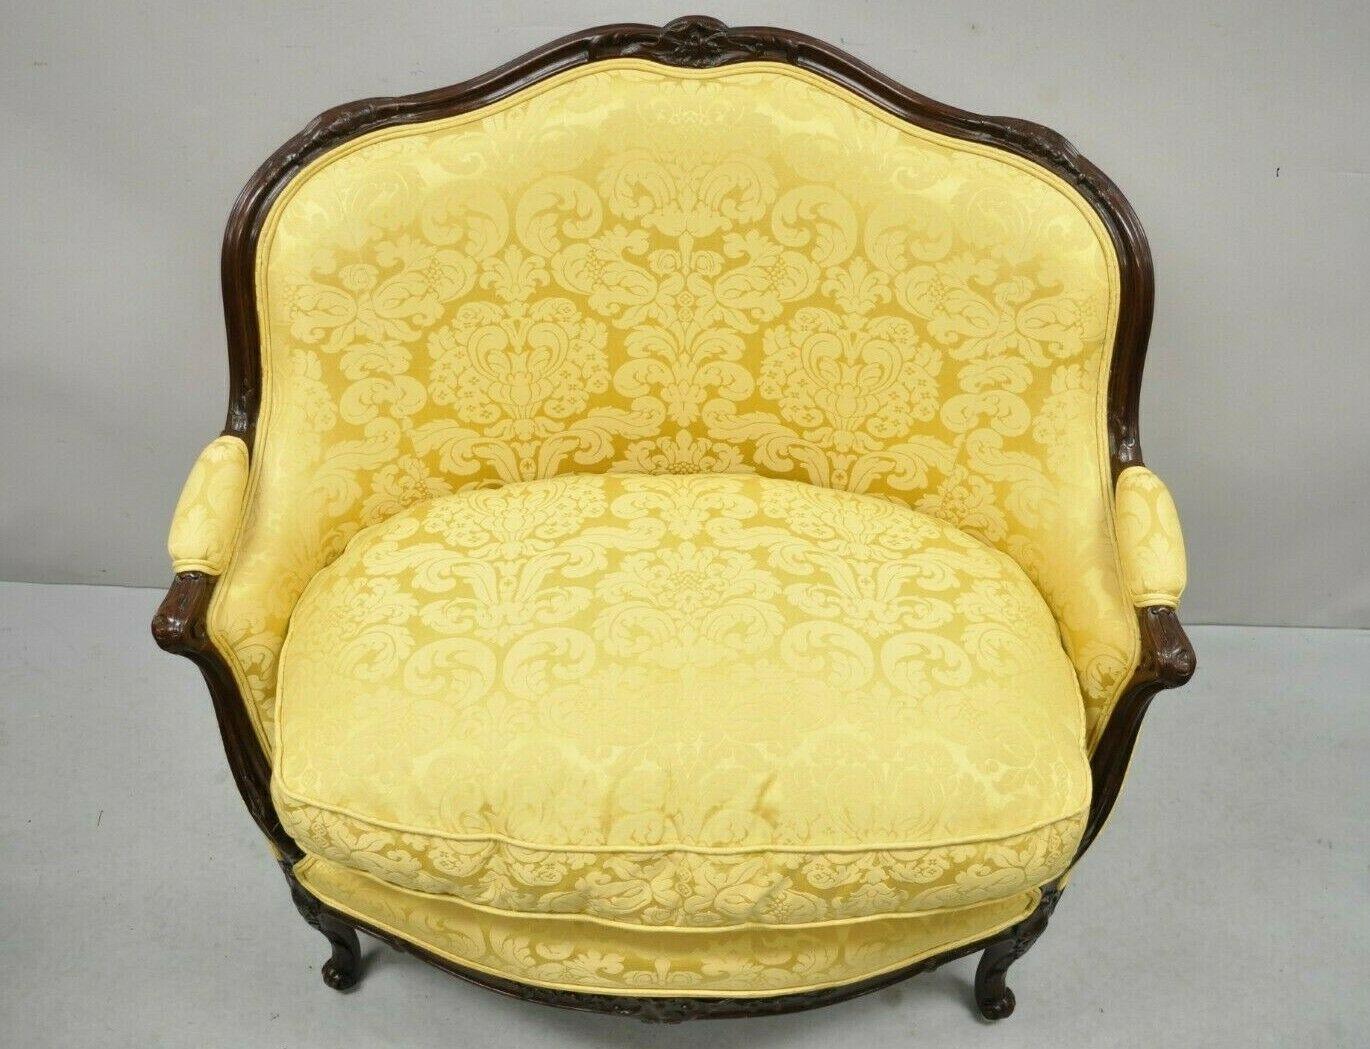 French Louis XV style gold upholstered wide seat lounge chair Settee Bergere. Item features a unique wide seat, gold floral print fabric, solid wood frame, beautiful wood grain, cabriole legs, very nice vintage item, great style and form. Circa Late